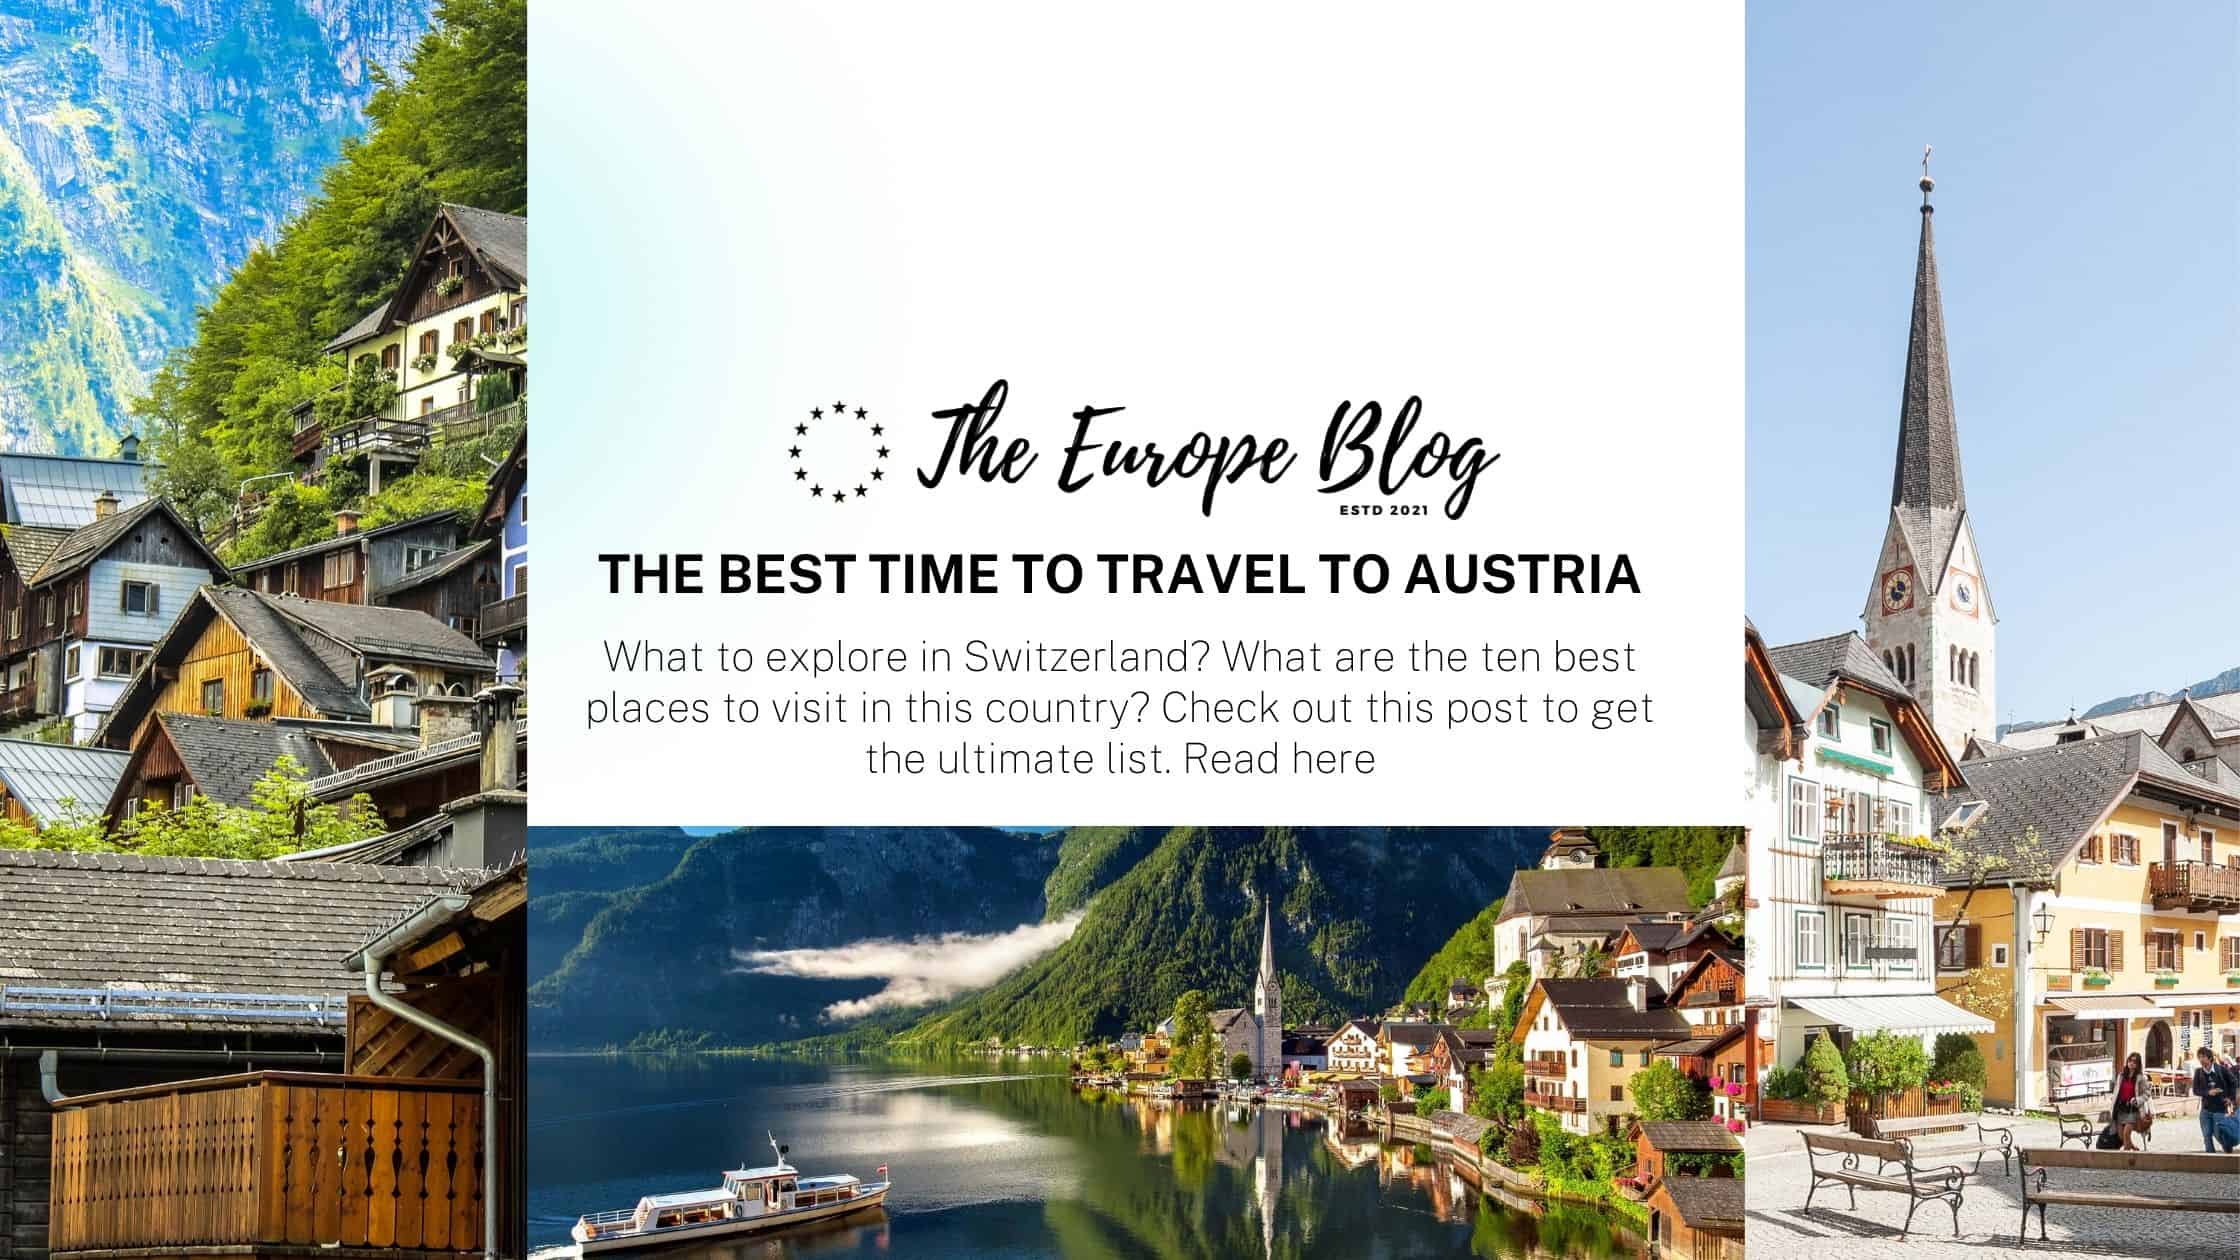 The Best Time to Travel to Austria